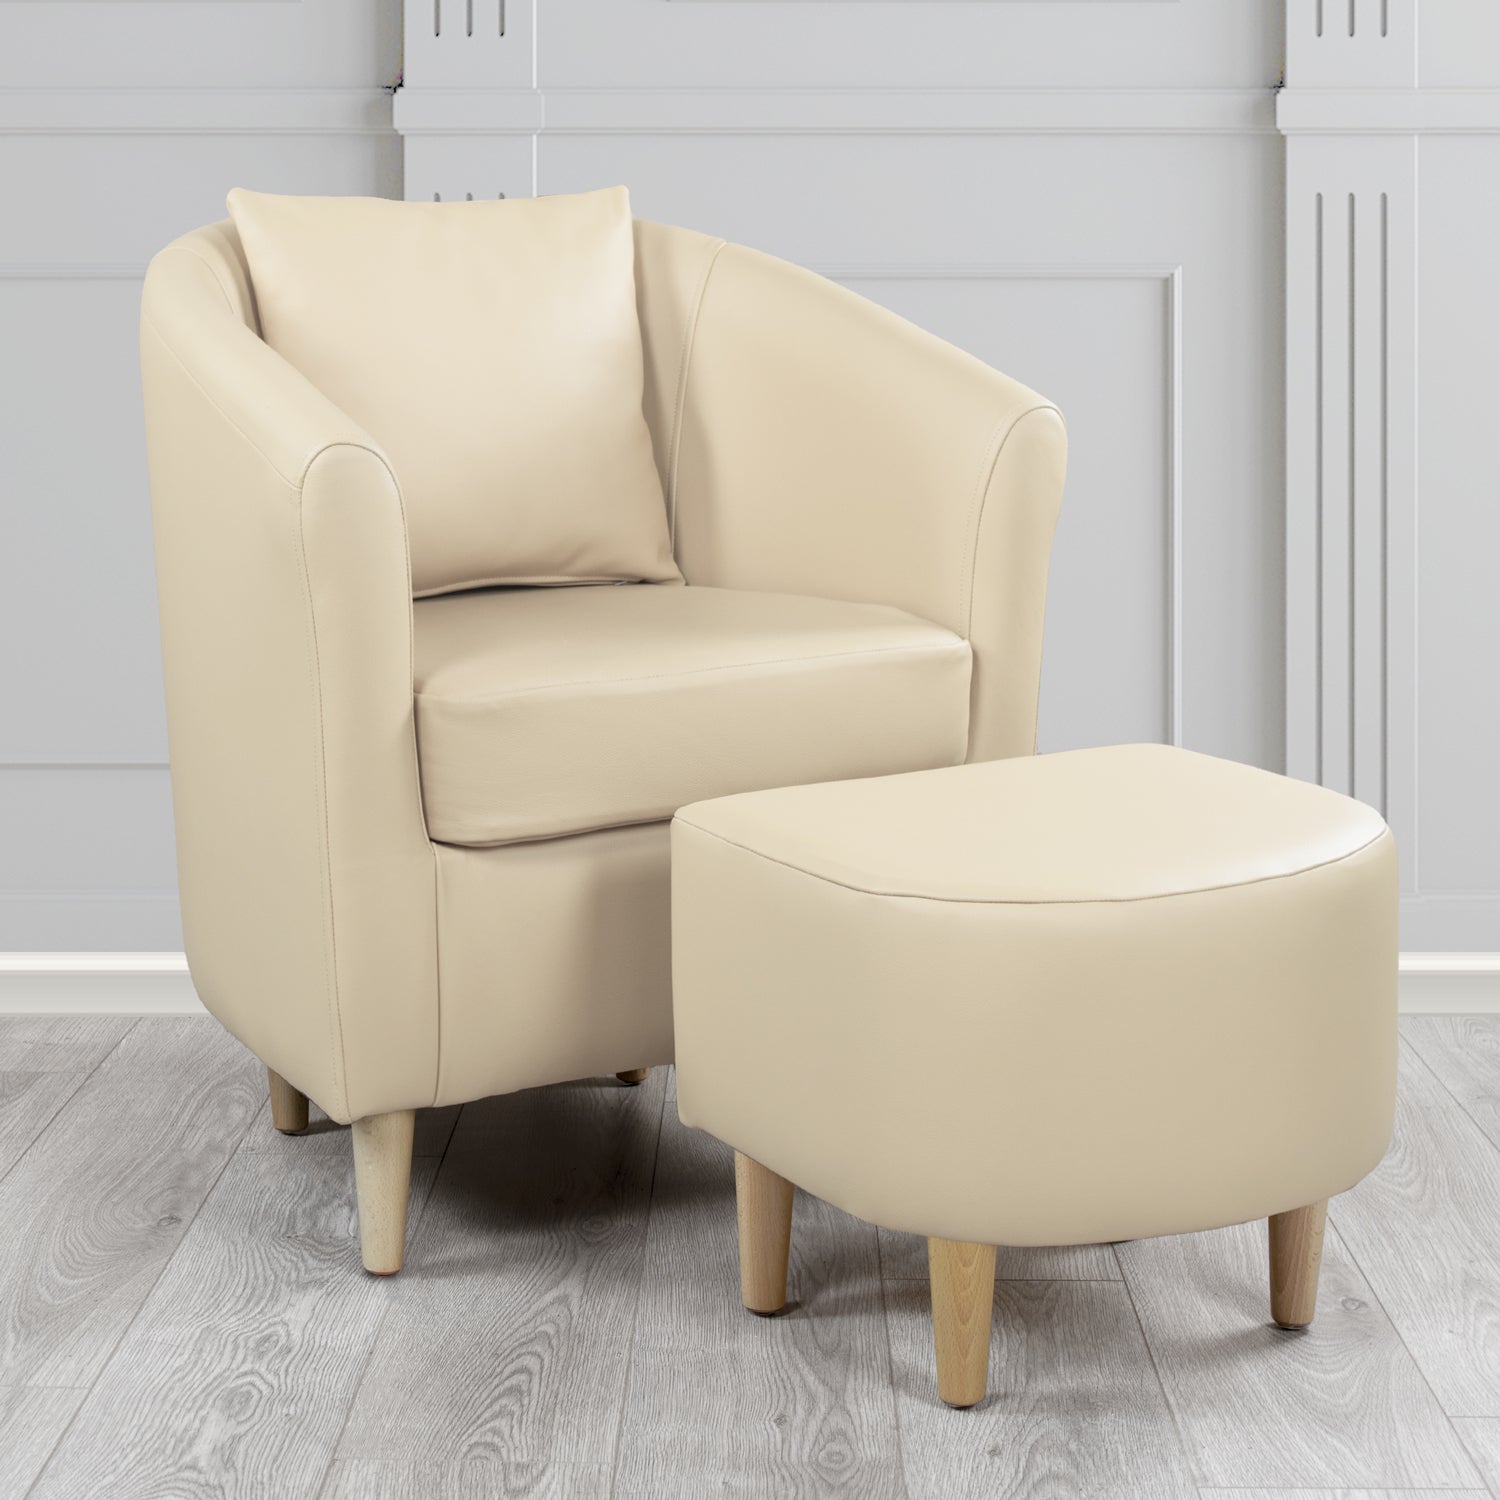 St Tropez Shelly Almond Crib 5 Genuine Leather Tub Chair & Footstool Set With Scatter Cushion (6619456569386)